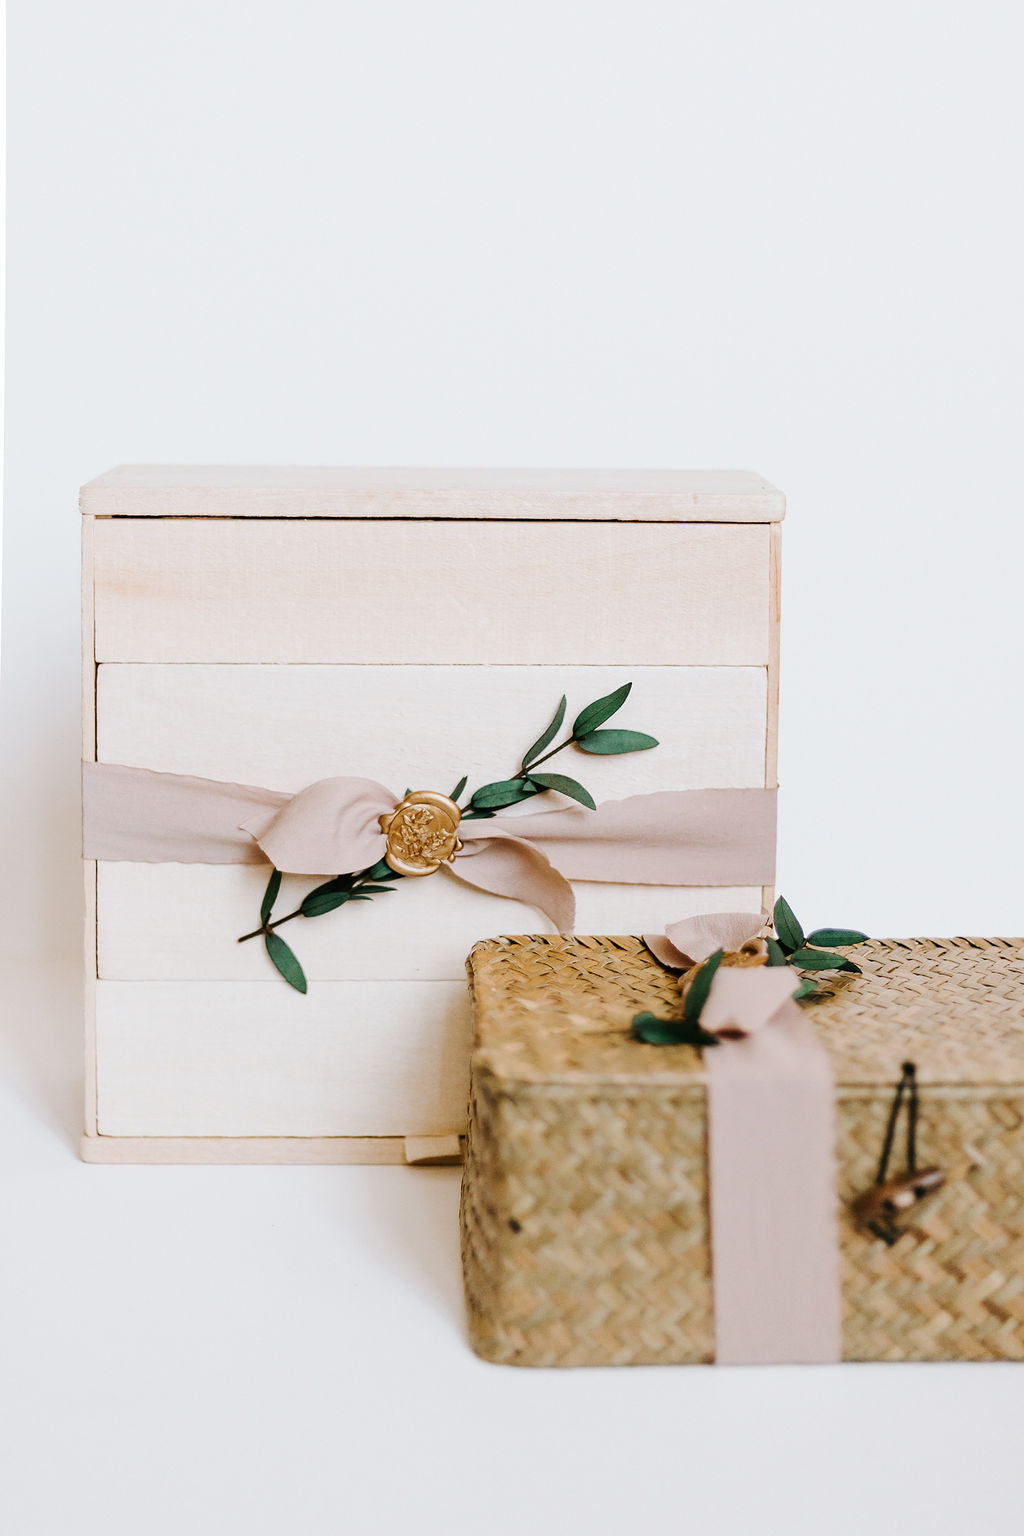 How To Design Client Gifts That Are In Alignment With Your Brand